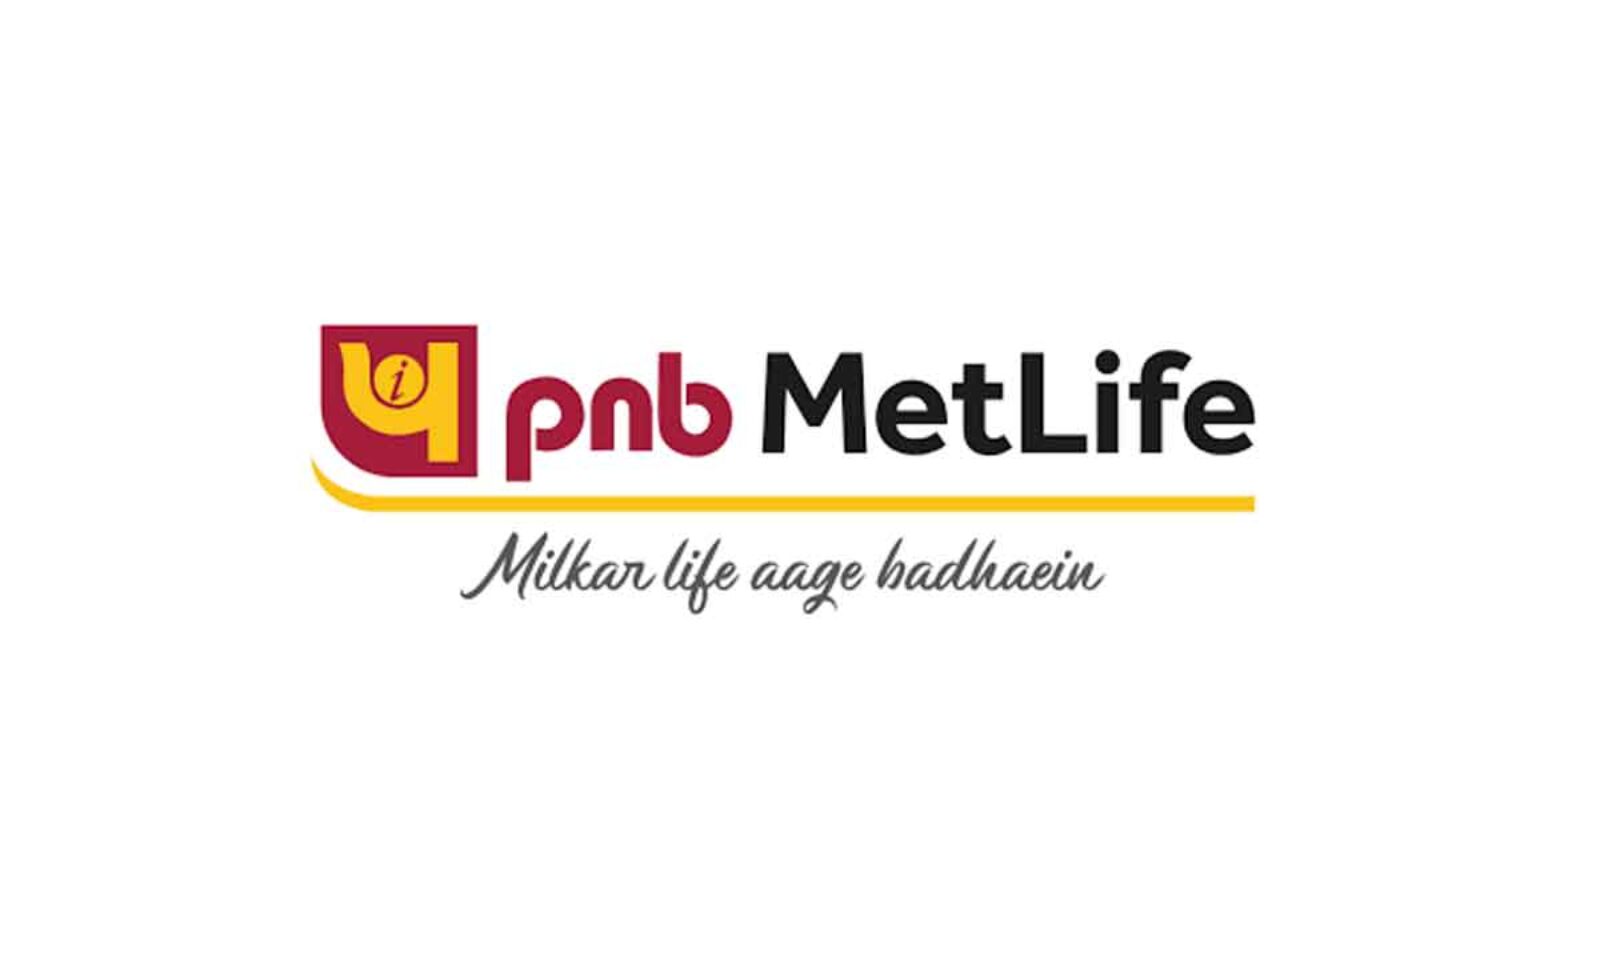 PNB MetLife appoints Sourabh Lohtia as their new Head of Marketing - India  News & Updates on EVENTFAQS